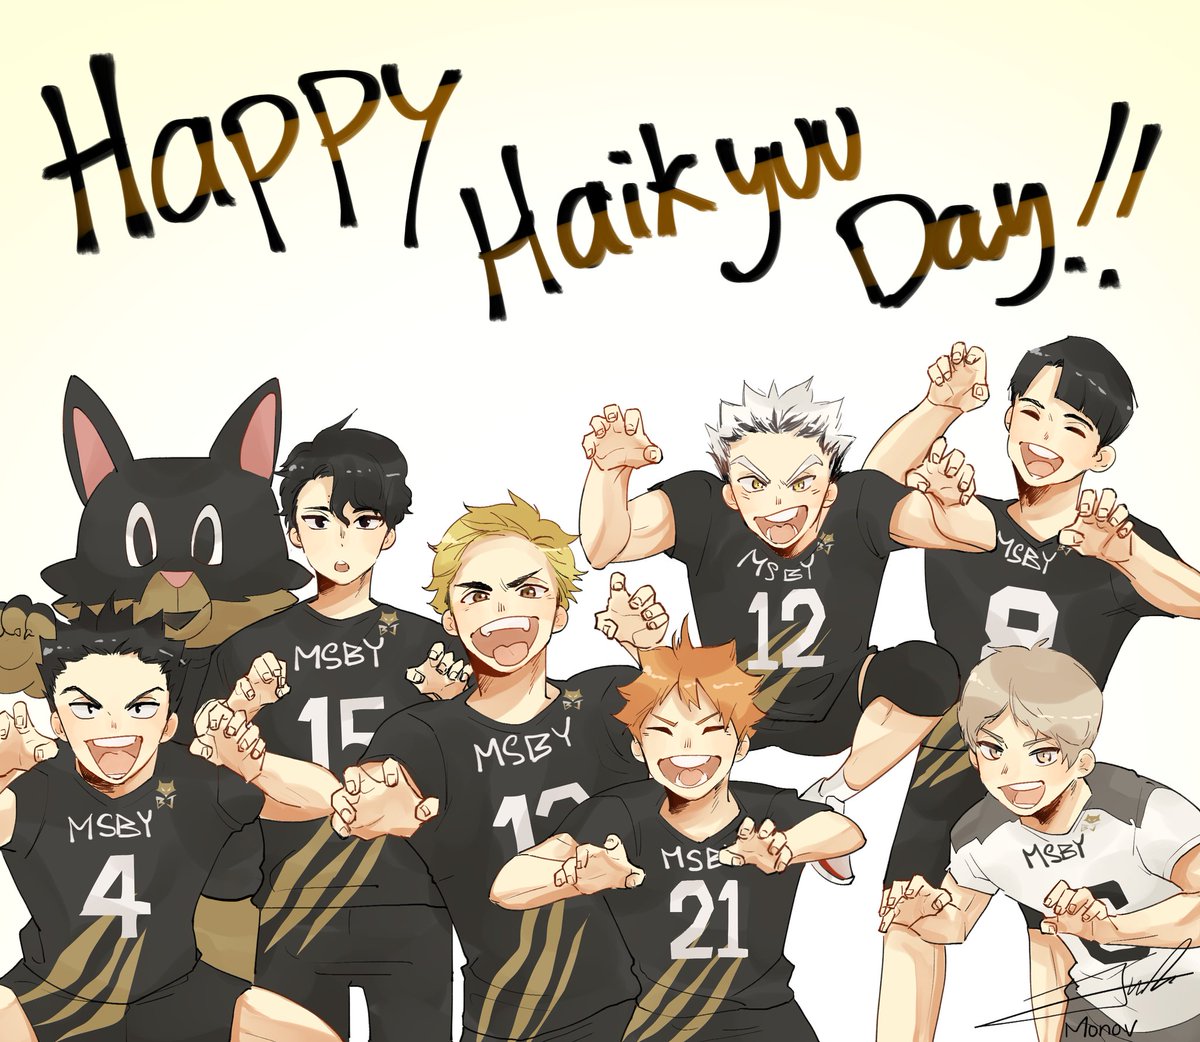 (19/08/2020) Happy #Haikyuu Day!!!

Brought to you by MSBY members and my top 3 favorite ships!! °˖✧◝(≧∇≦)◜✧˖°

I'm one day late, forgive me
(・ัᗜ・ั)و 